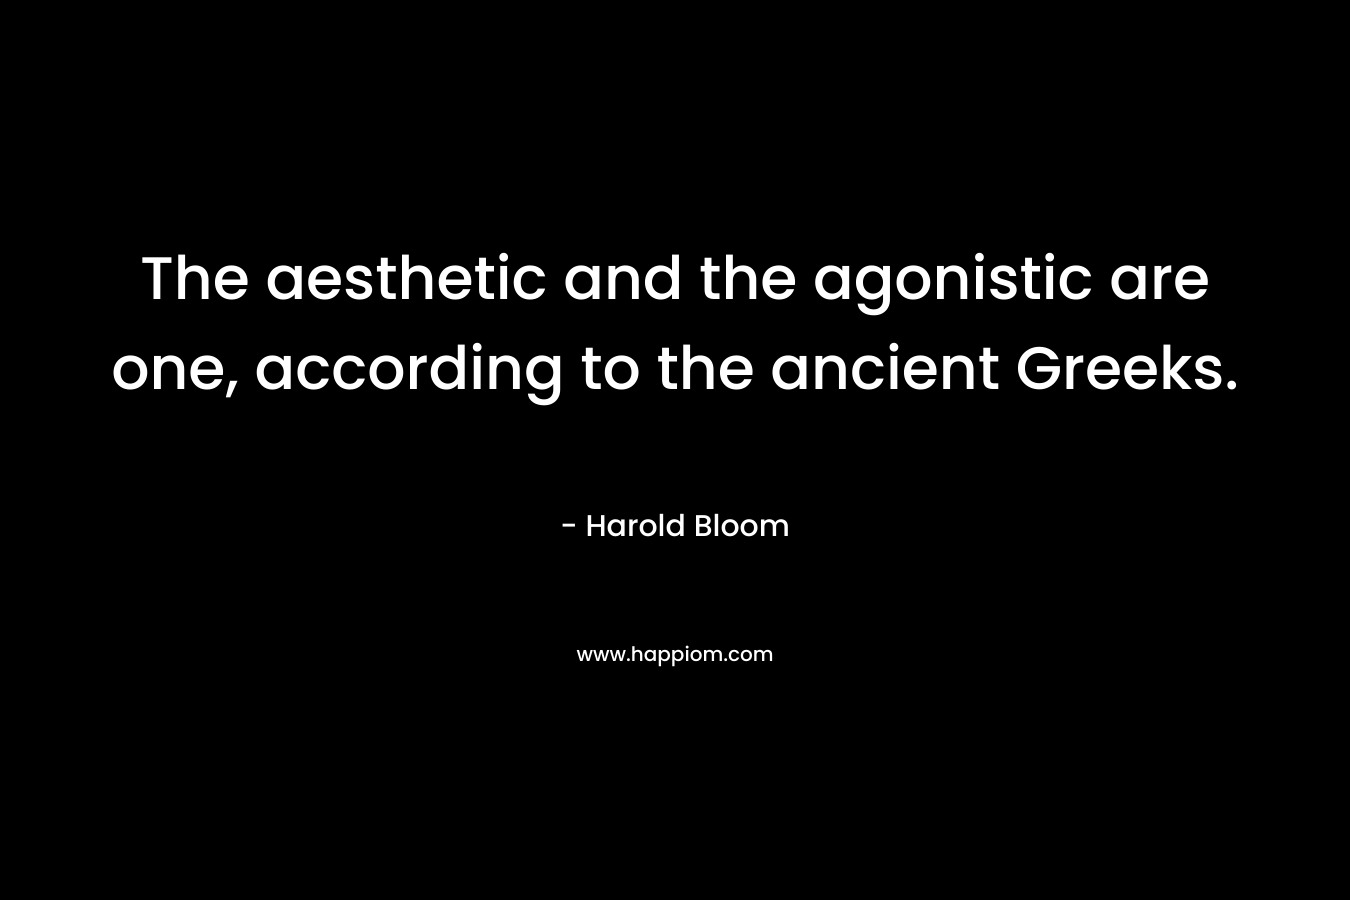 The aesthetic and the agonistic are one, according to the ancient Greeks. – Harold Bloom